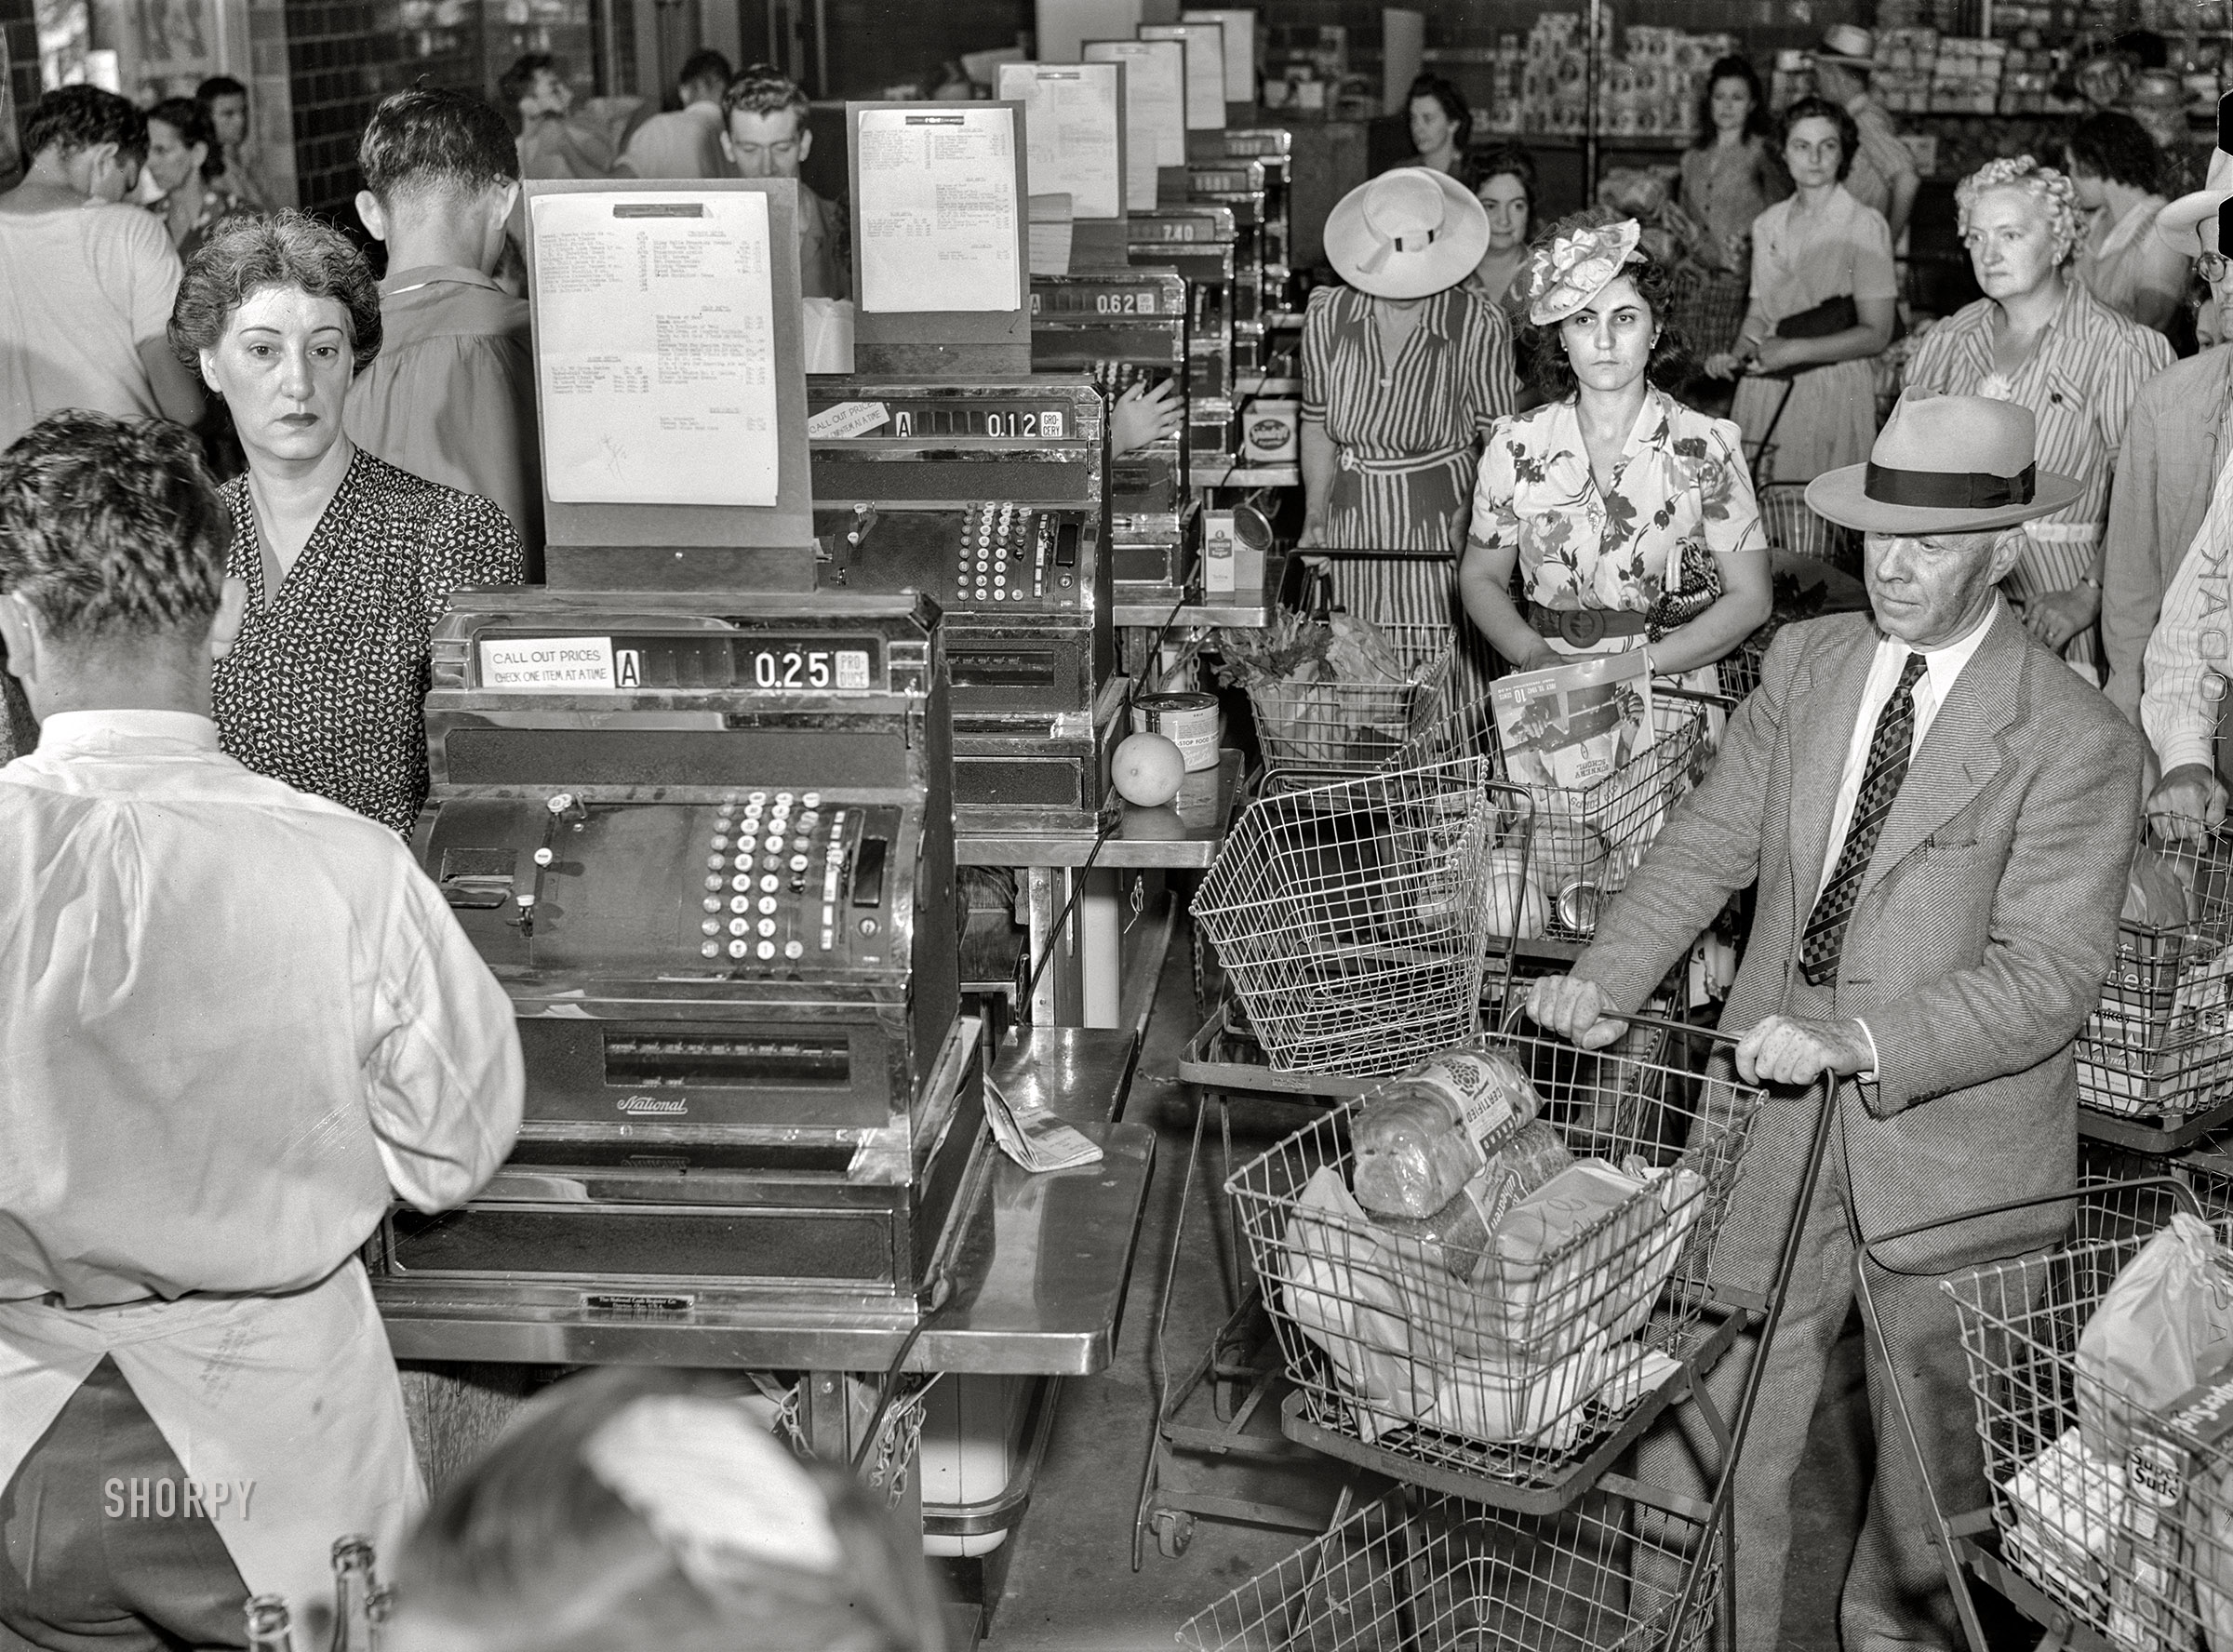 June-July 1942. Washington, D.C. "Cashiers checking out customer purchases with Ration Book No. 1 at the Giant Food shopping center on Wisconsin Avenue. Giant Food Store is a self-service market chain handling all types and many varieties of food and household appliances." Acetate negative by Marjory Collins for the Farm Security Administration. View full size.